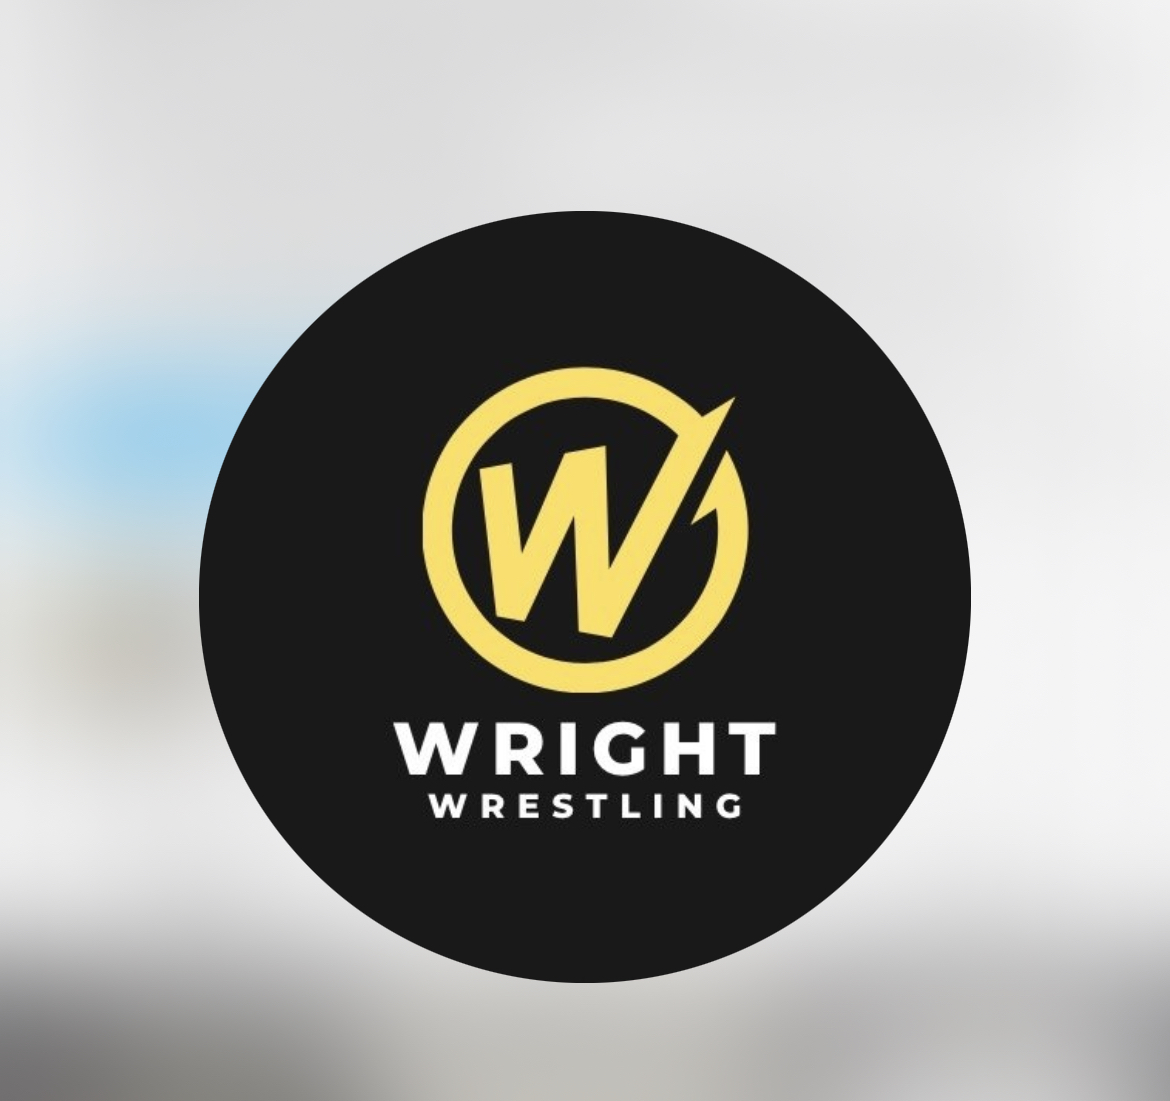 wright wrestling pulled from Instagram